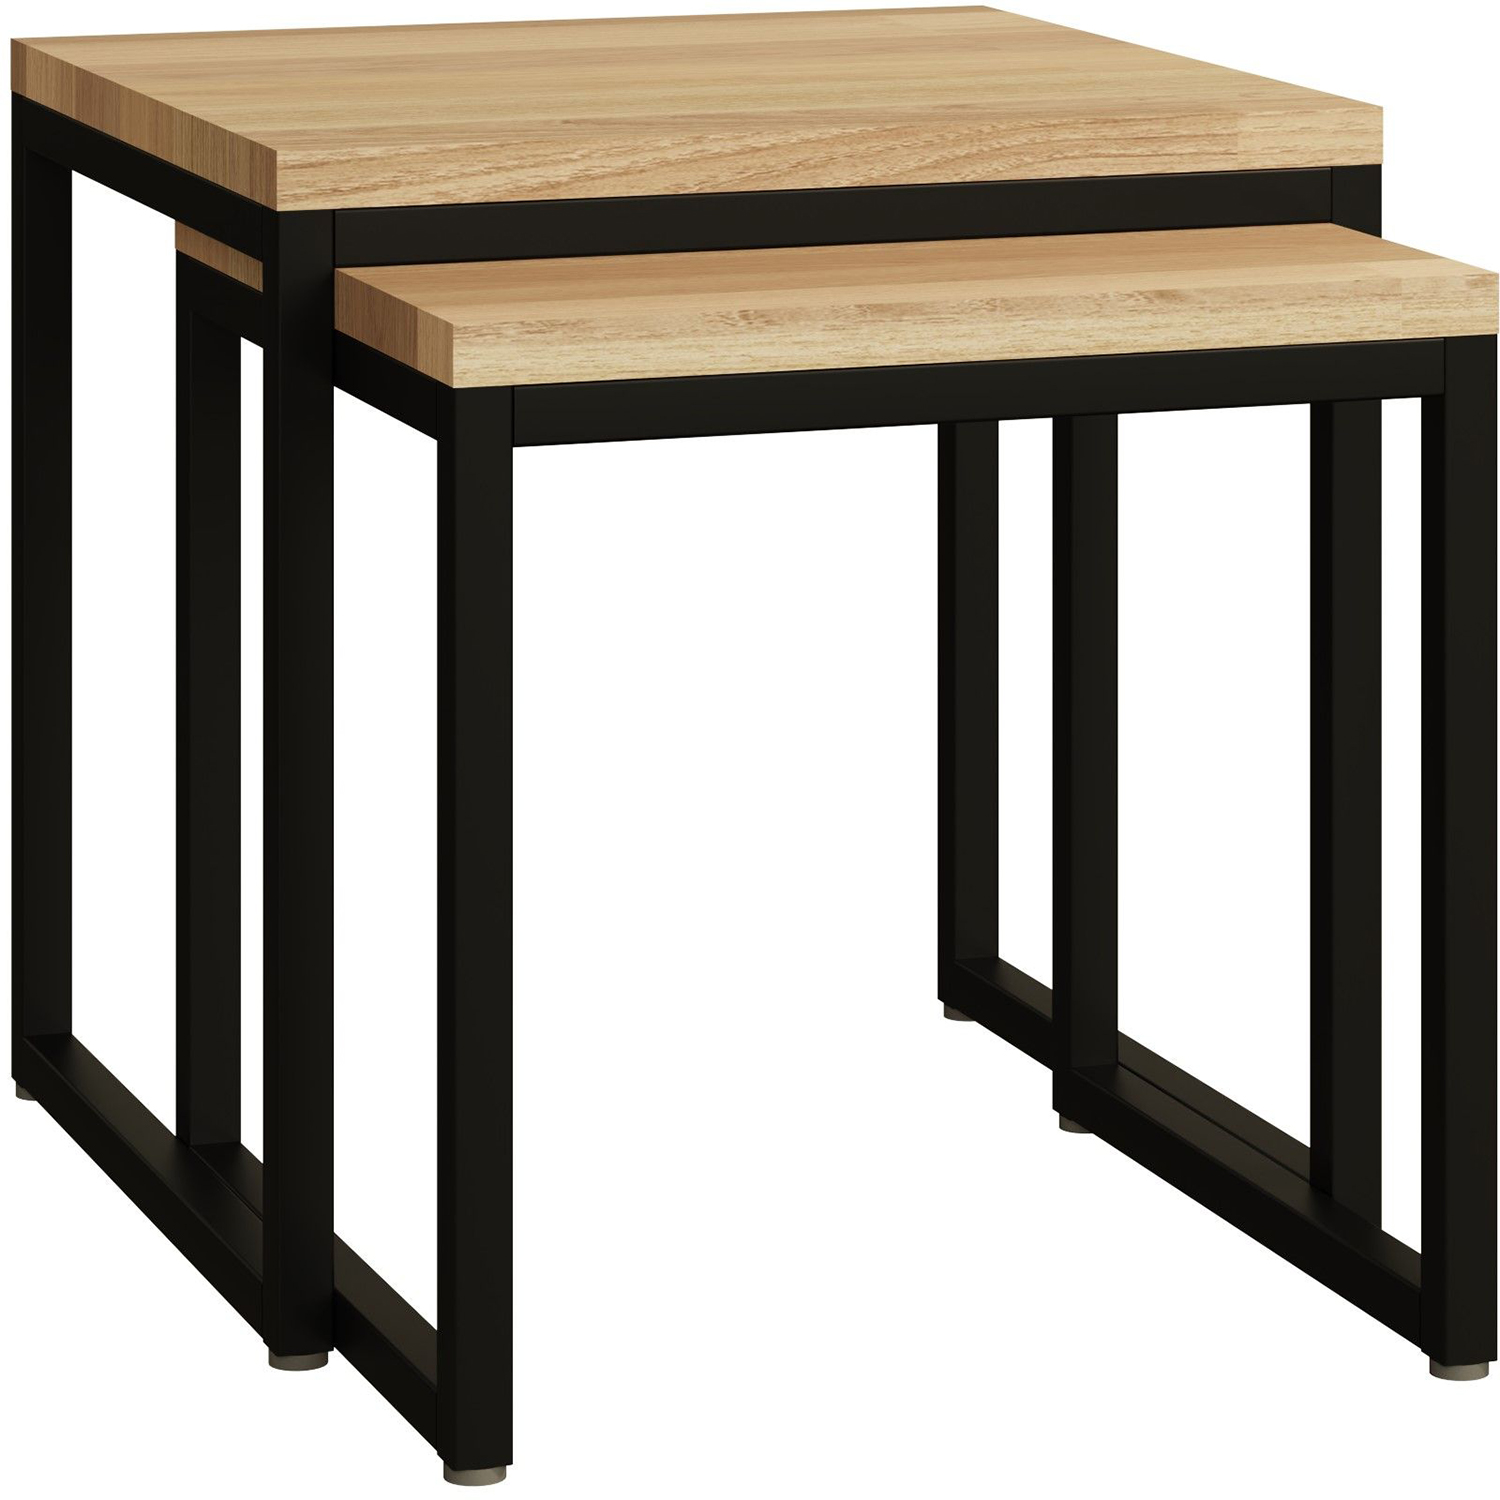 Bell & Stocchero Mono Nest of 2 Tables